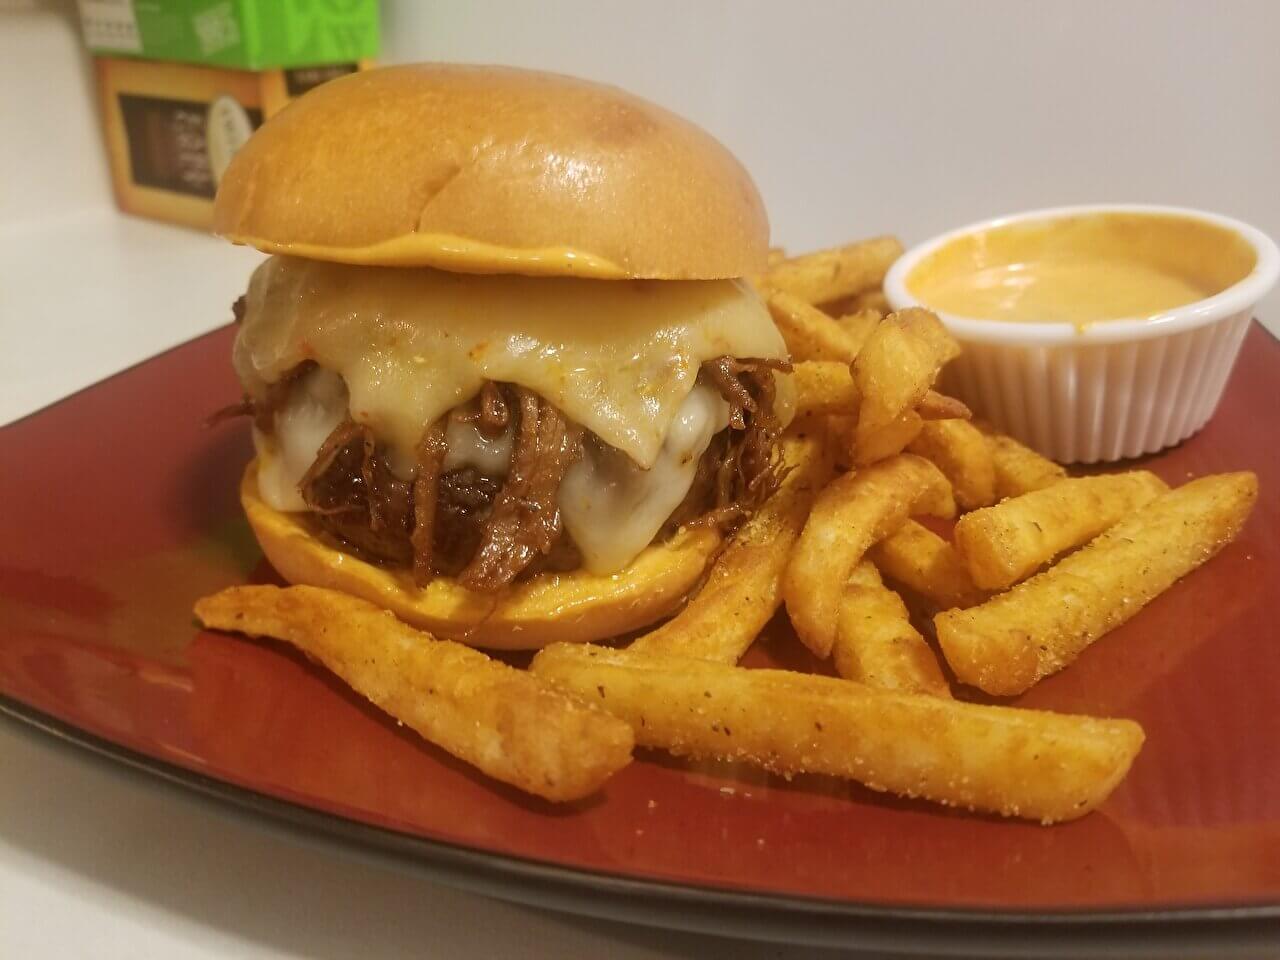 Barbecue bourbon burger with pulled pork and Carolina reaper pepper cheese